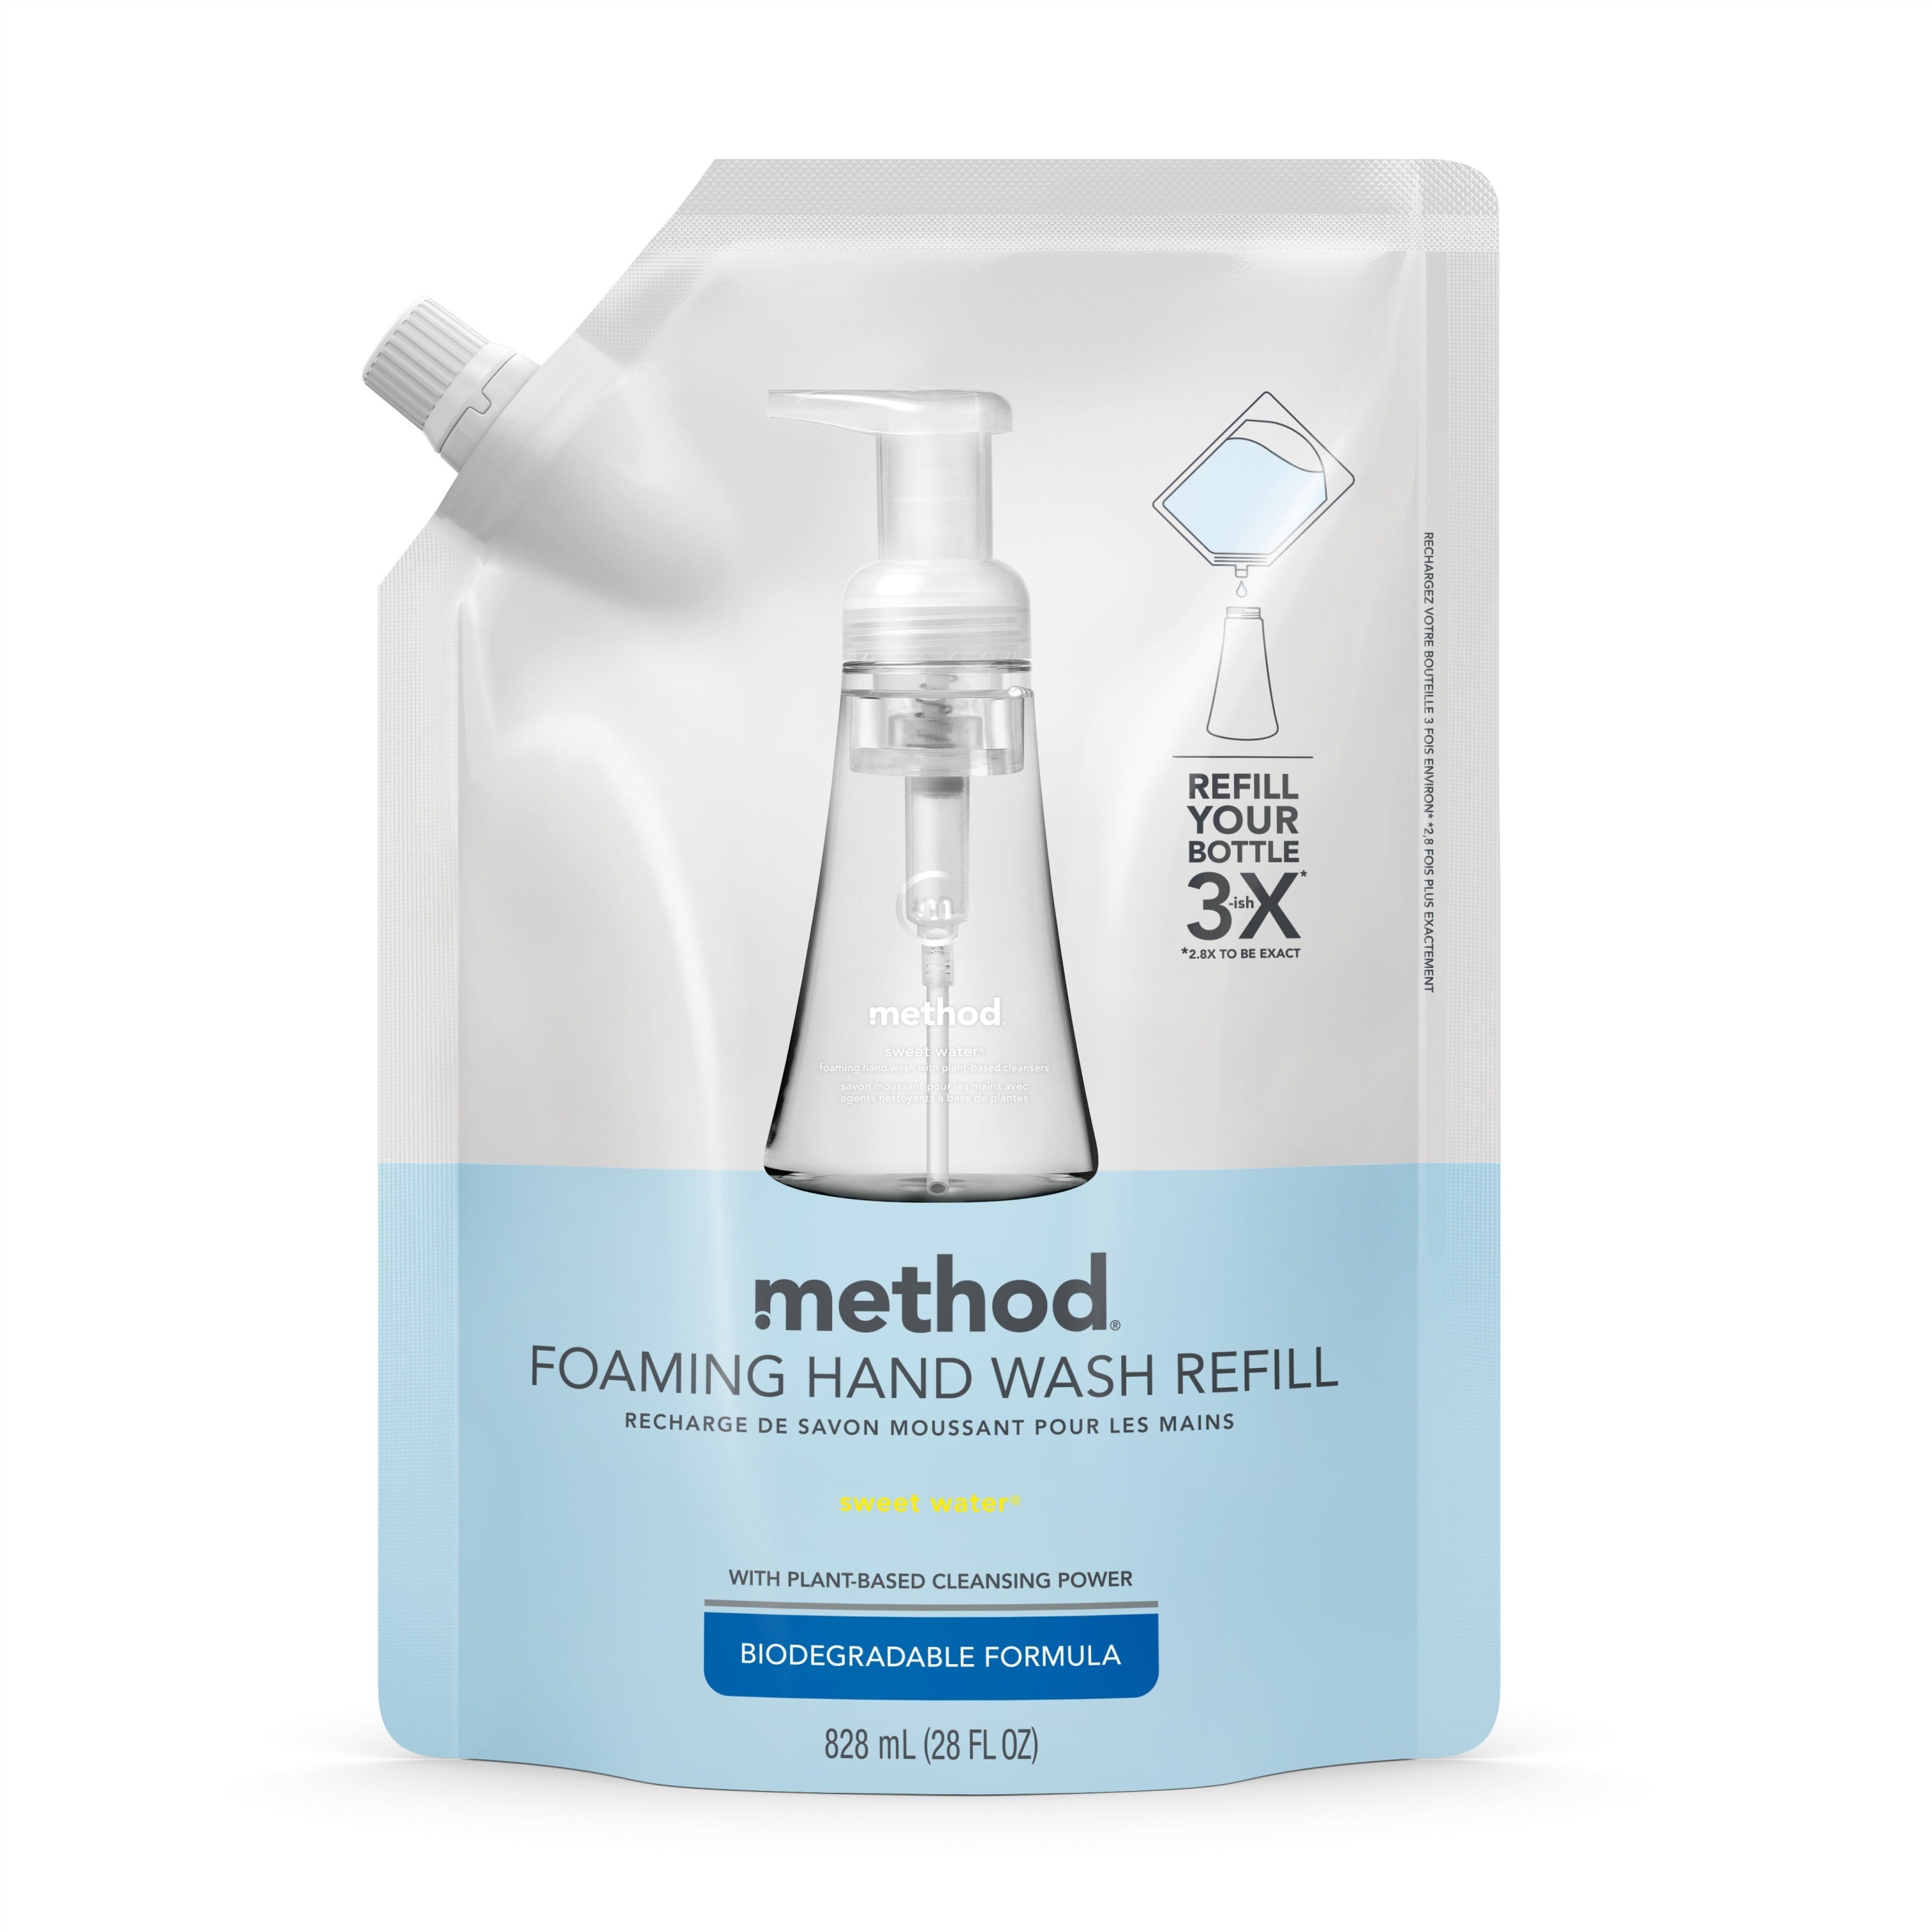 method-foaming-hand-soap-refill-sweet-water-scentfor-28-fl-oz-8281-ml-hand-clear-triclosan-free-4-carton_mth00662ct - 1